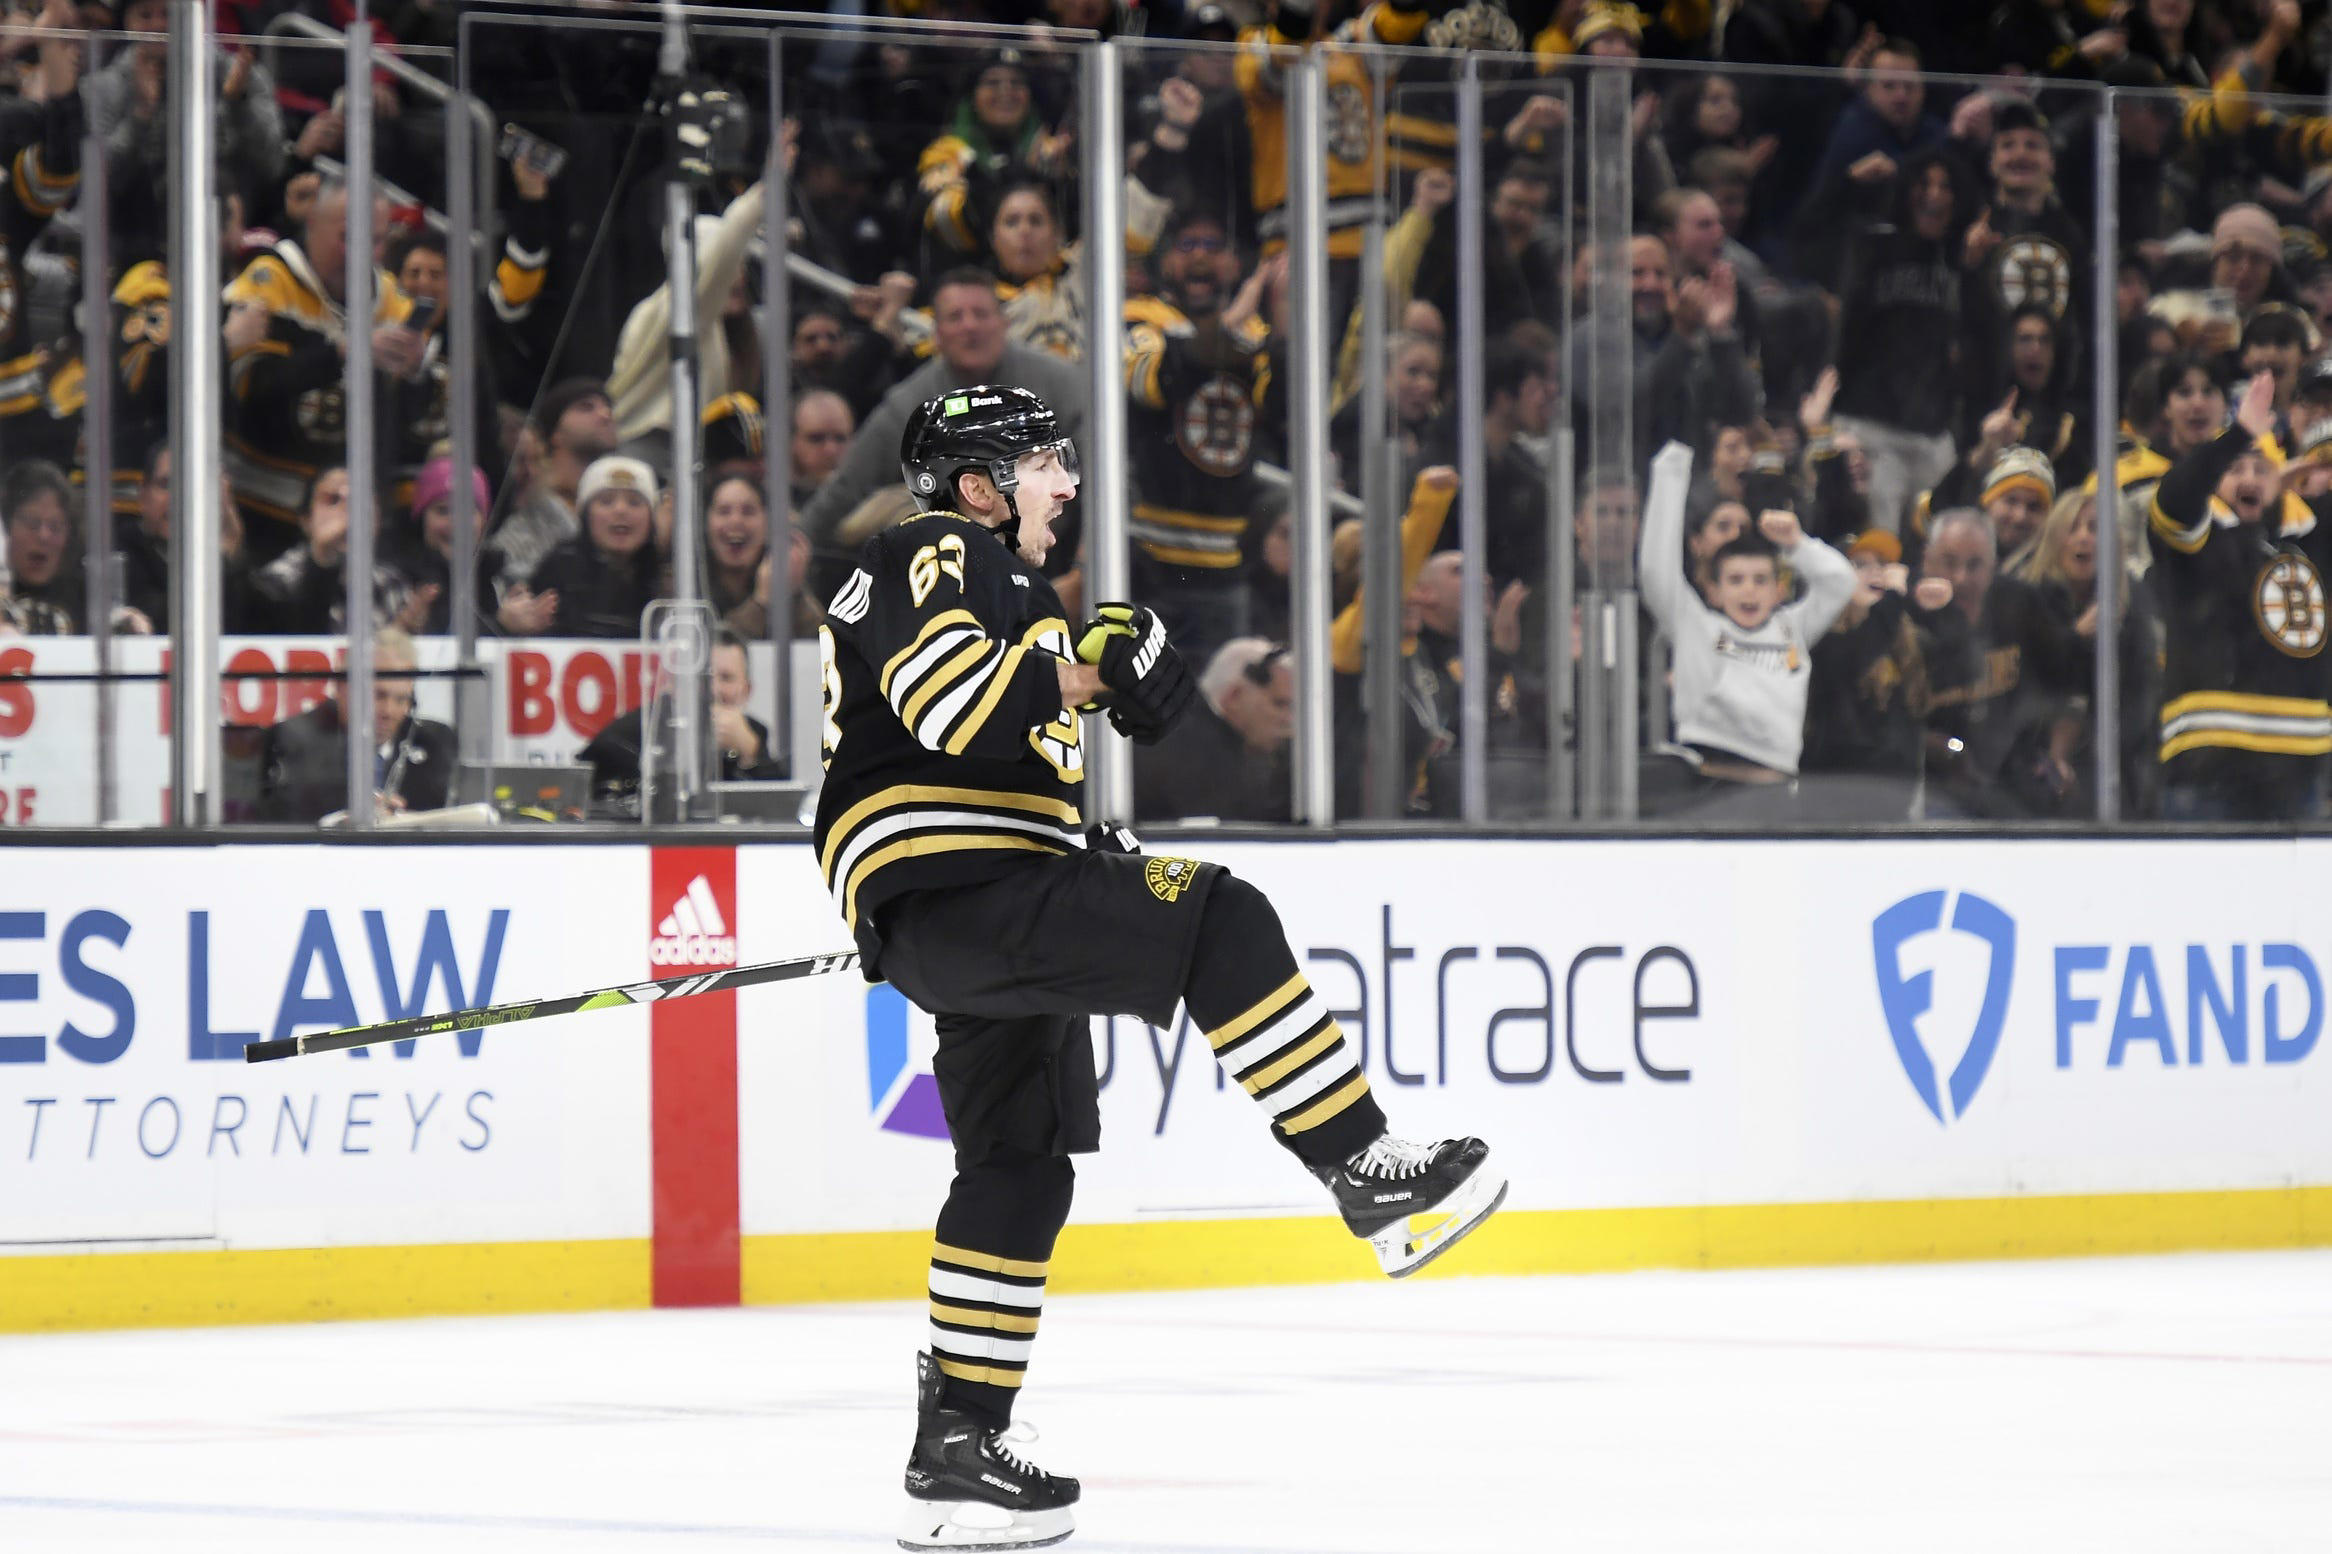 On an emotional weekend, Brad Marchand completely took over